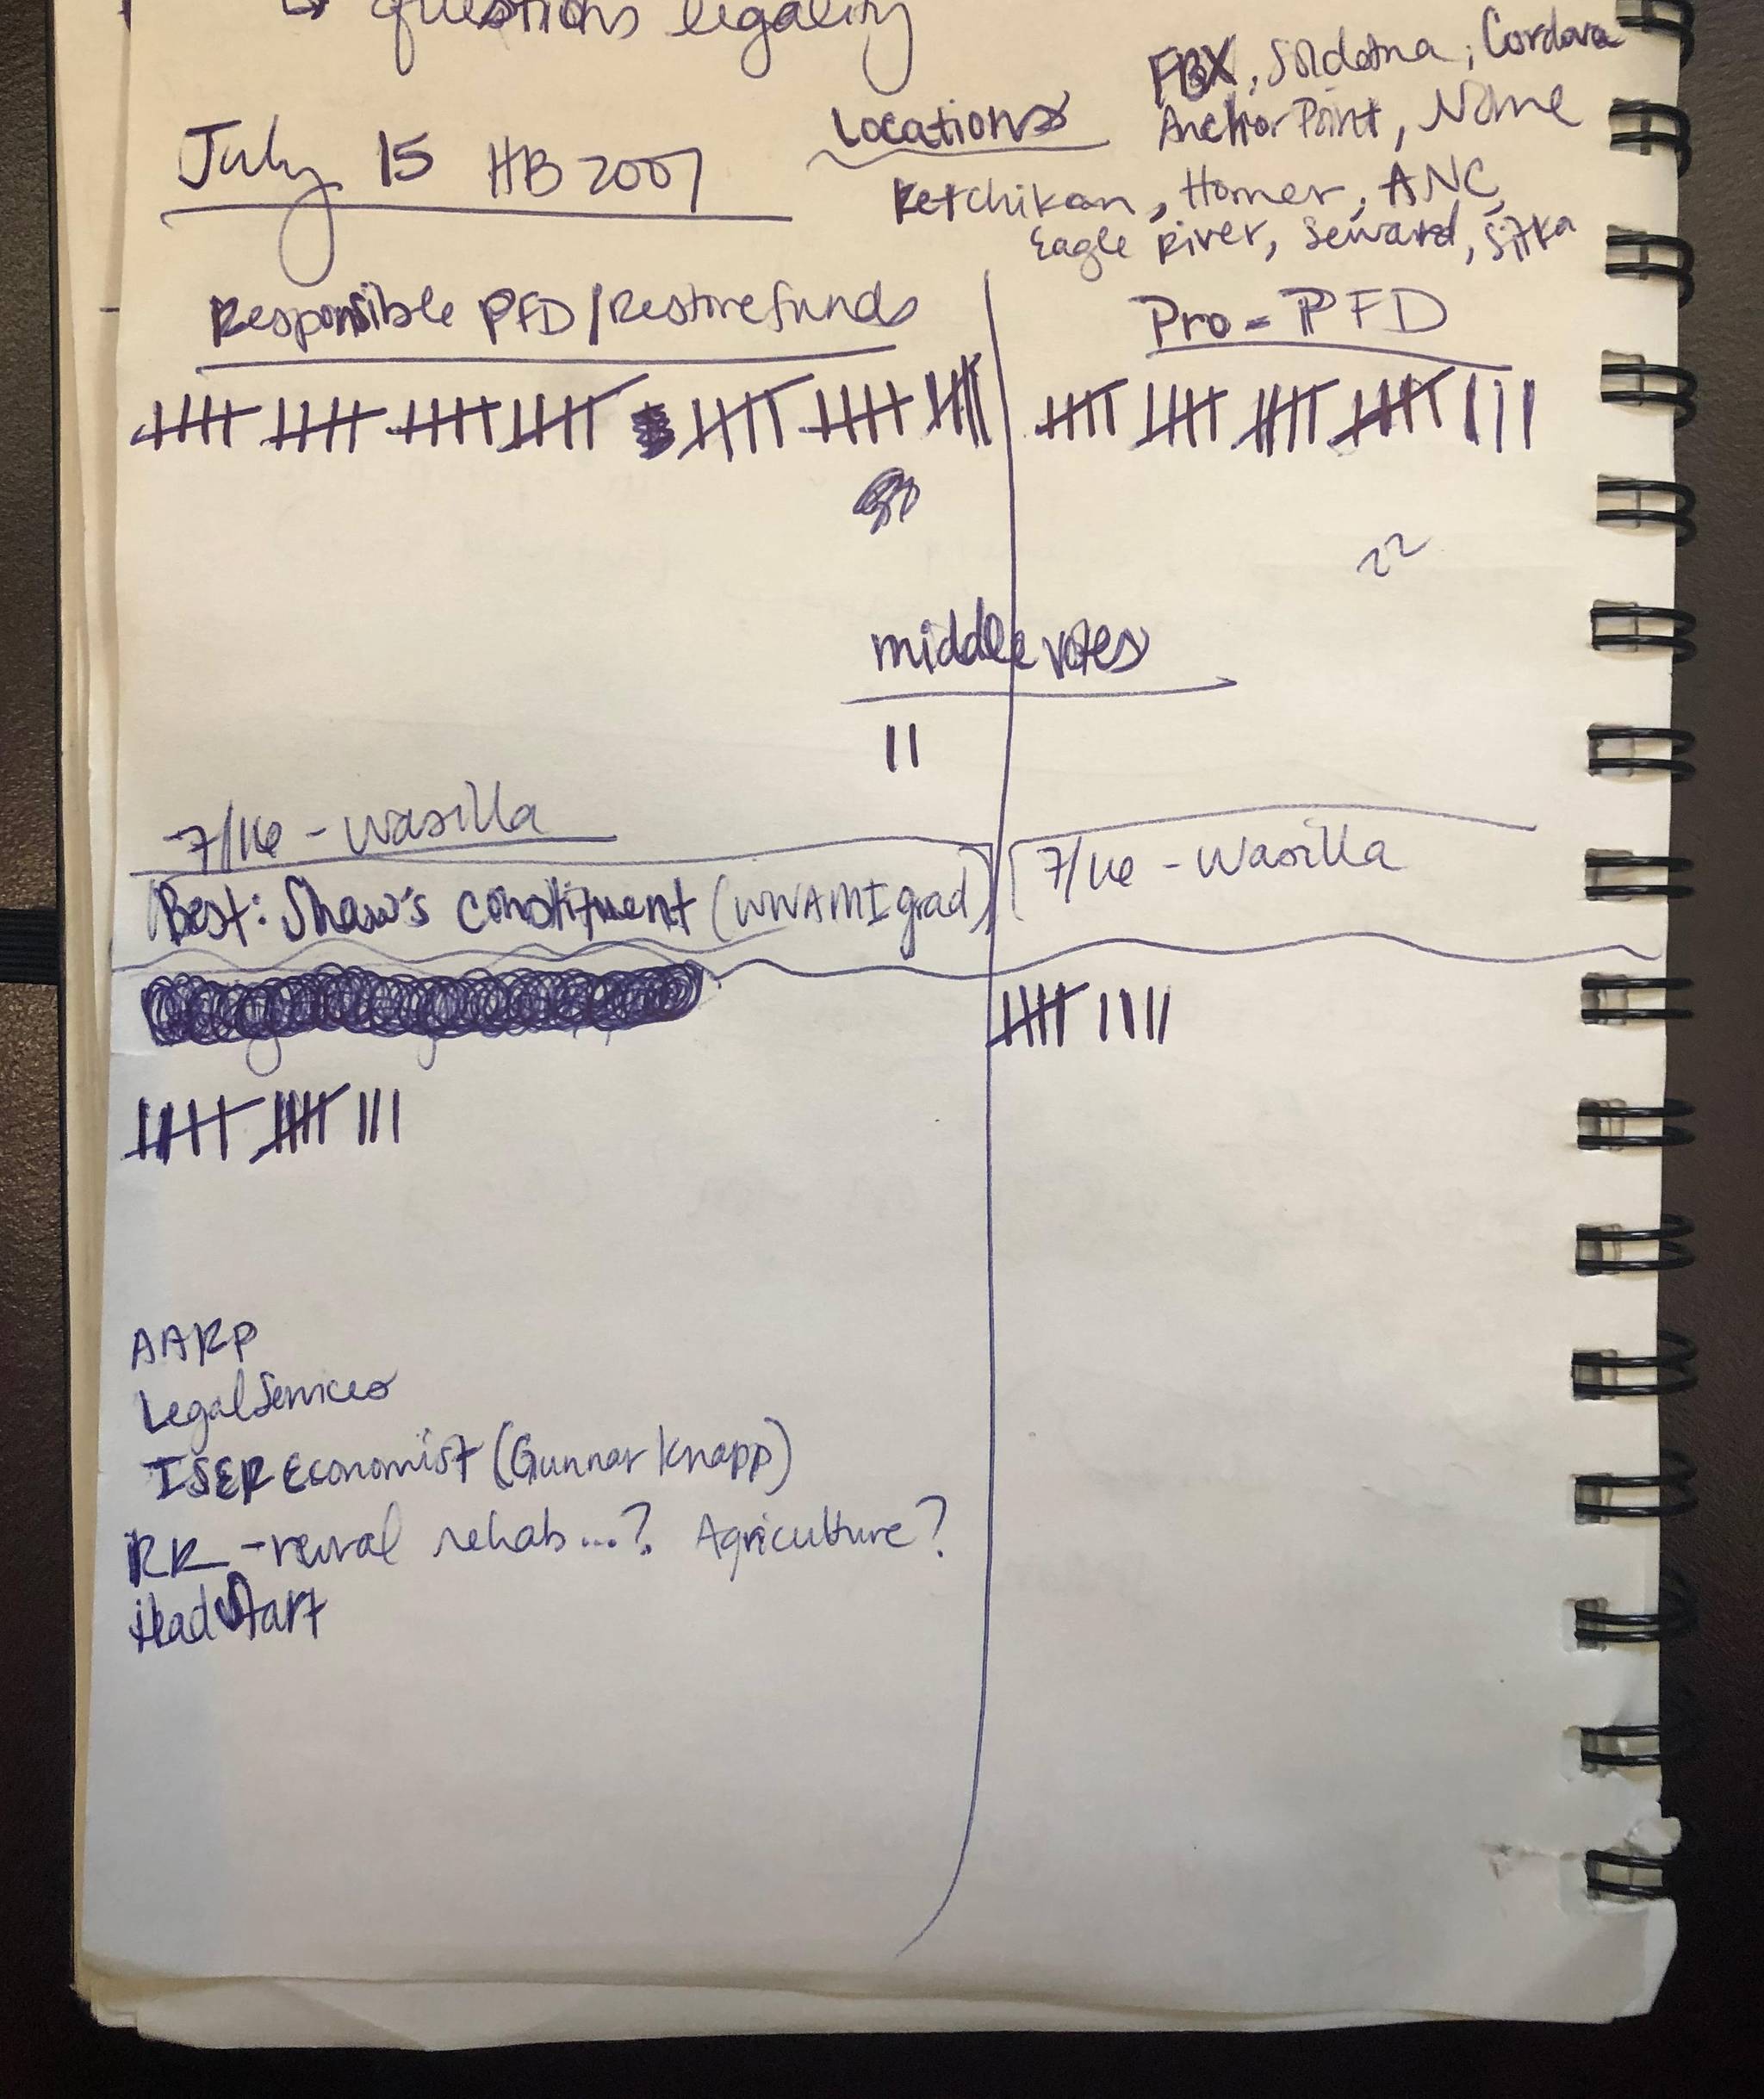 Juneau resident Alyson Currey has been keeping track of testimonies in her notebook, Tuesday, July 16, 2019. (Peter Segall | Juneau Empire)